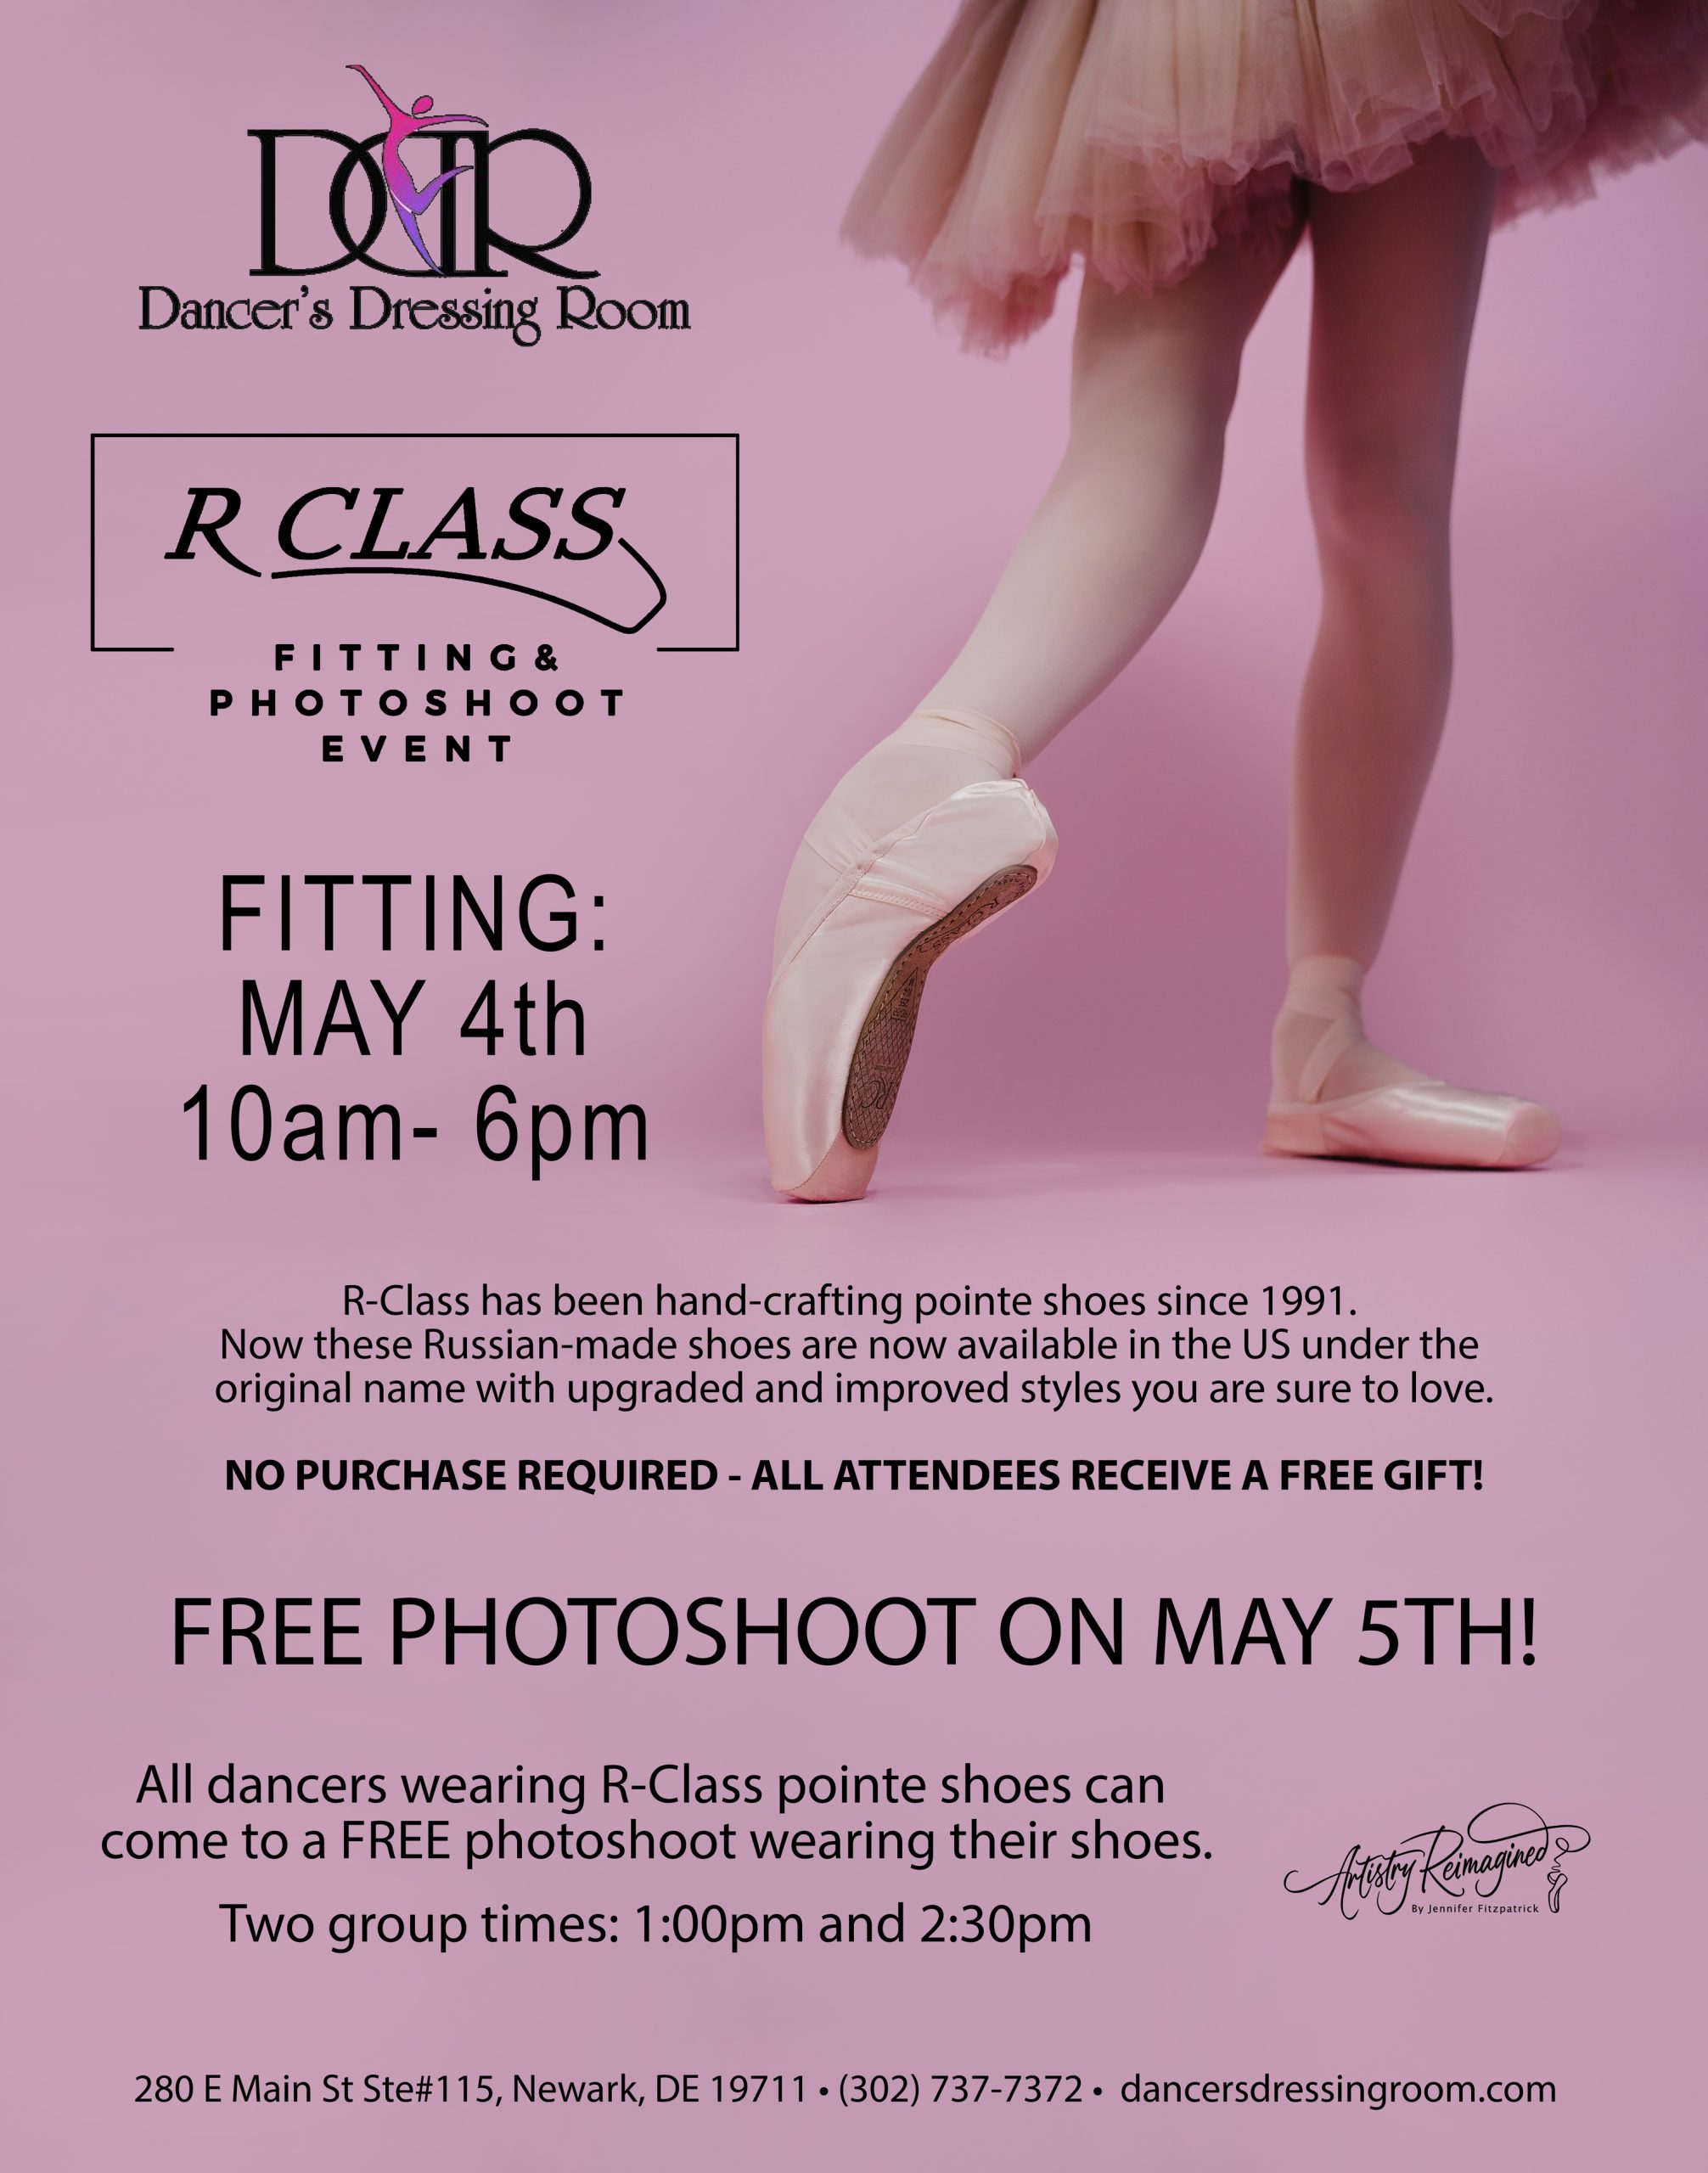 Dancer's Dressing Room R-Class Fitting and Photoshoot Event